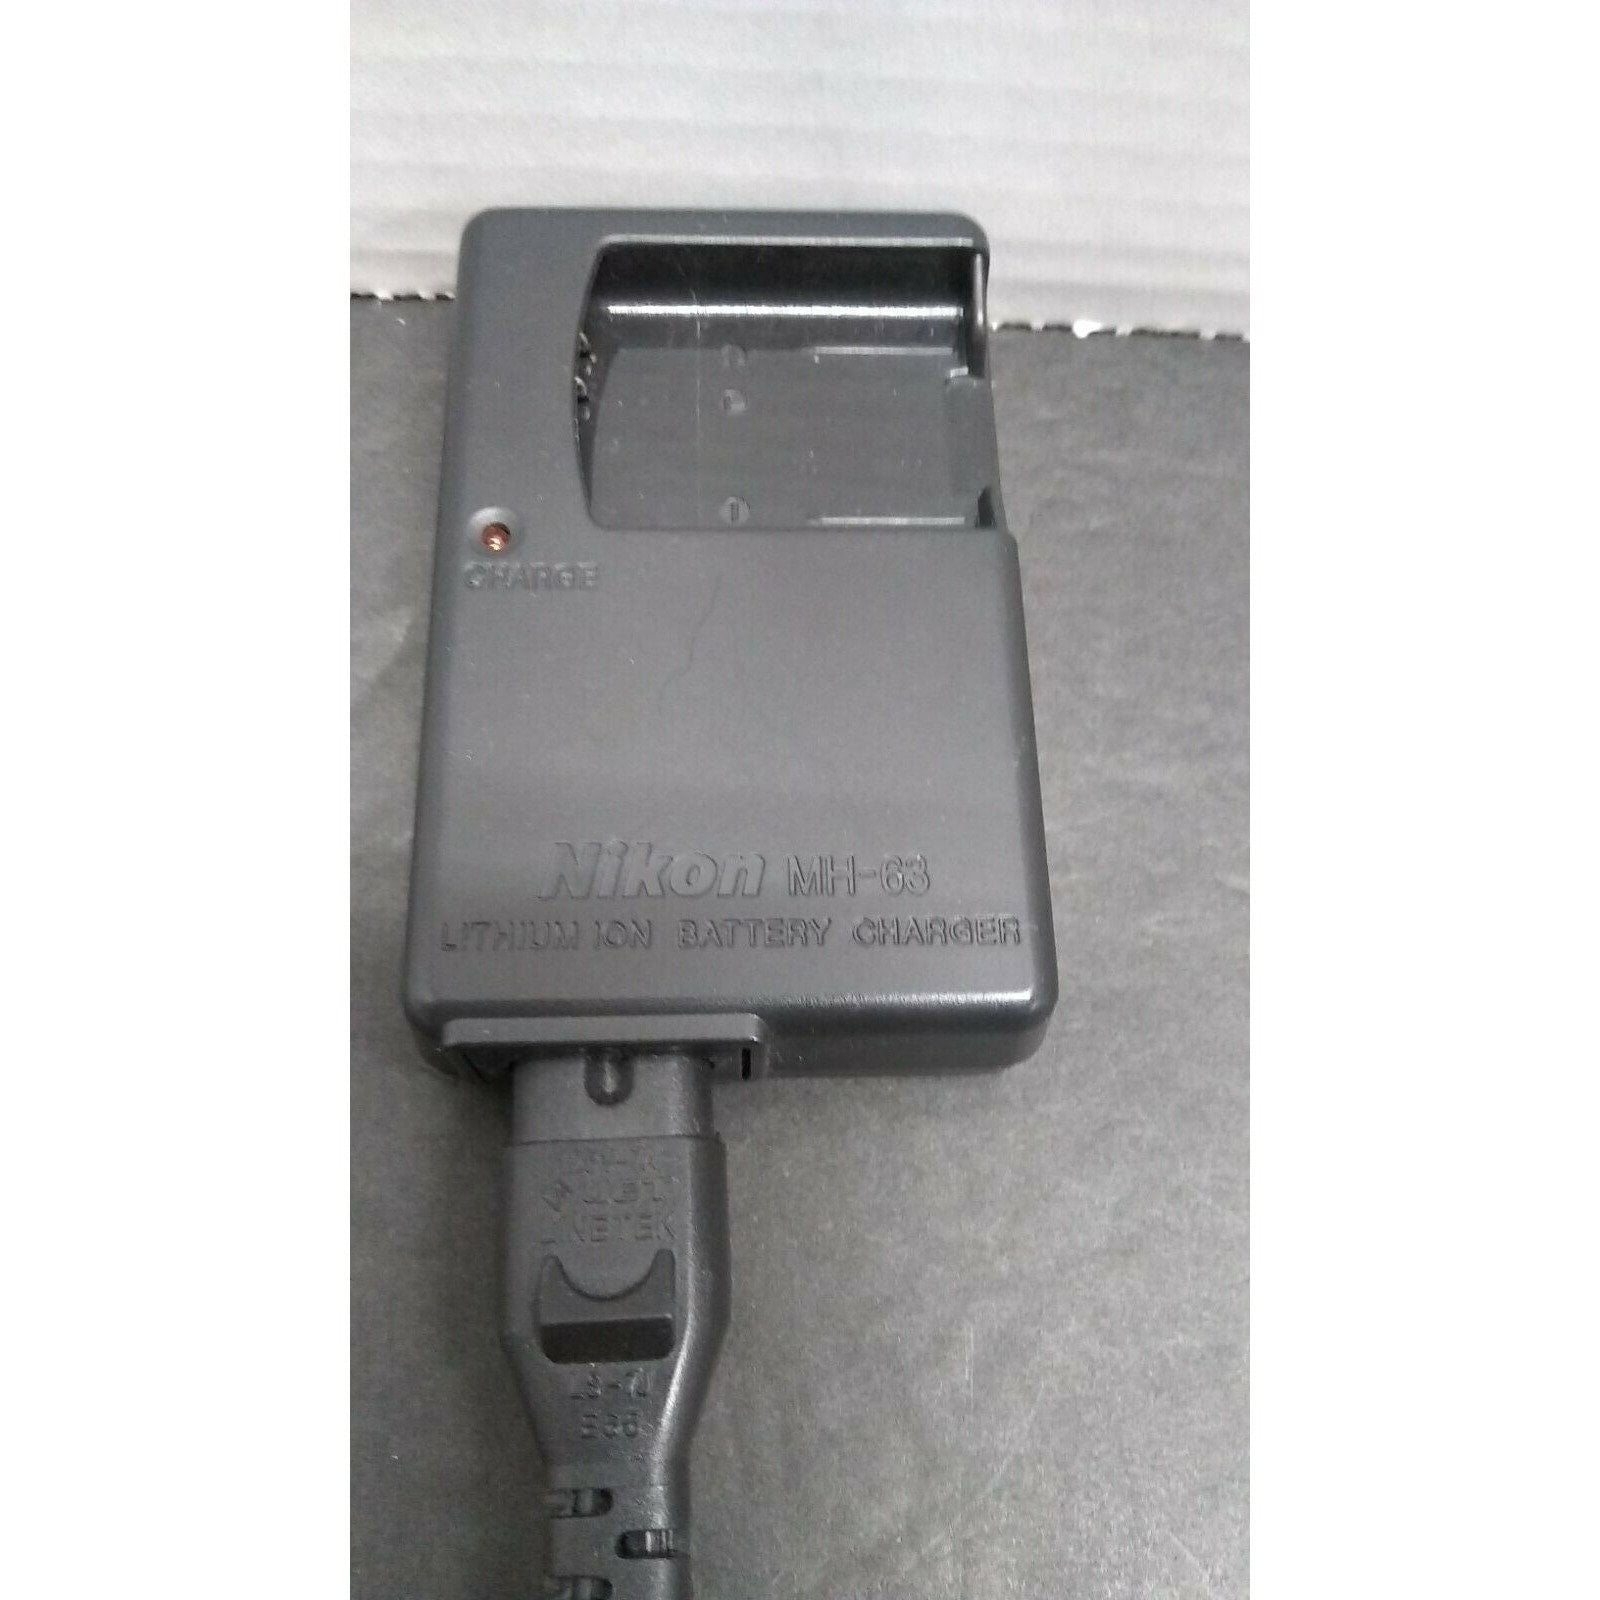 Nikon Coolpix MH-63 Battery Charger - Etsy